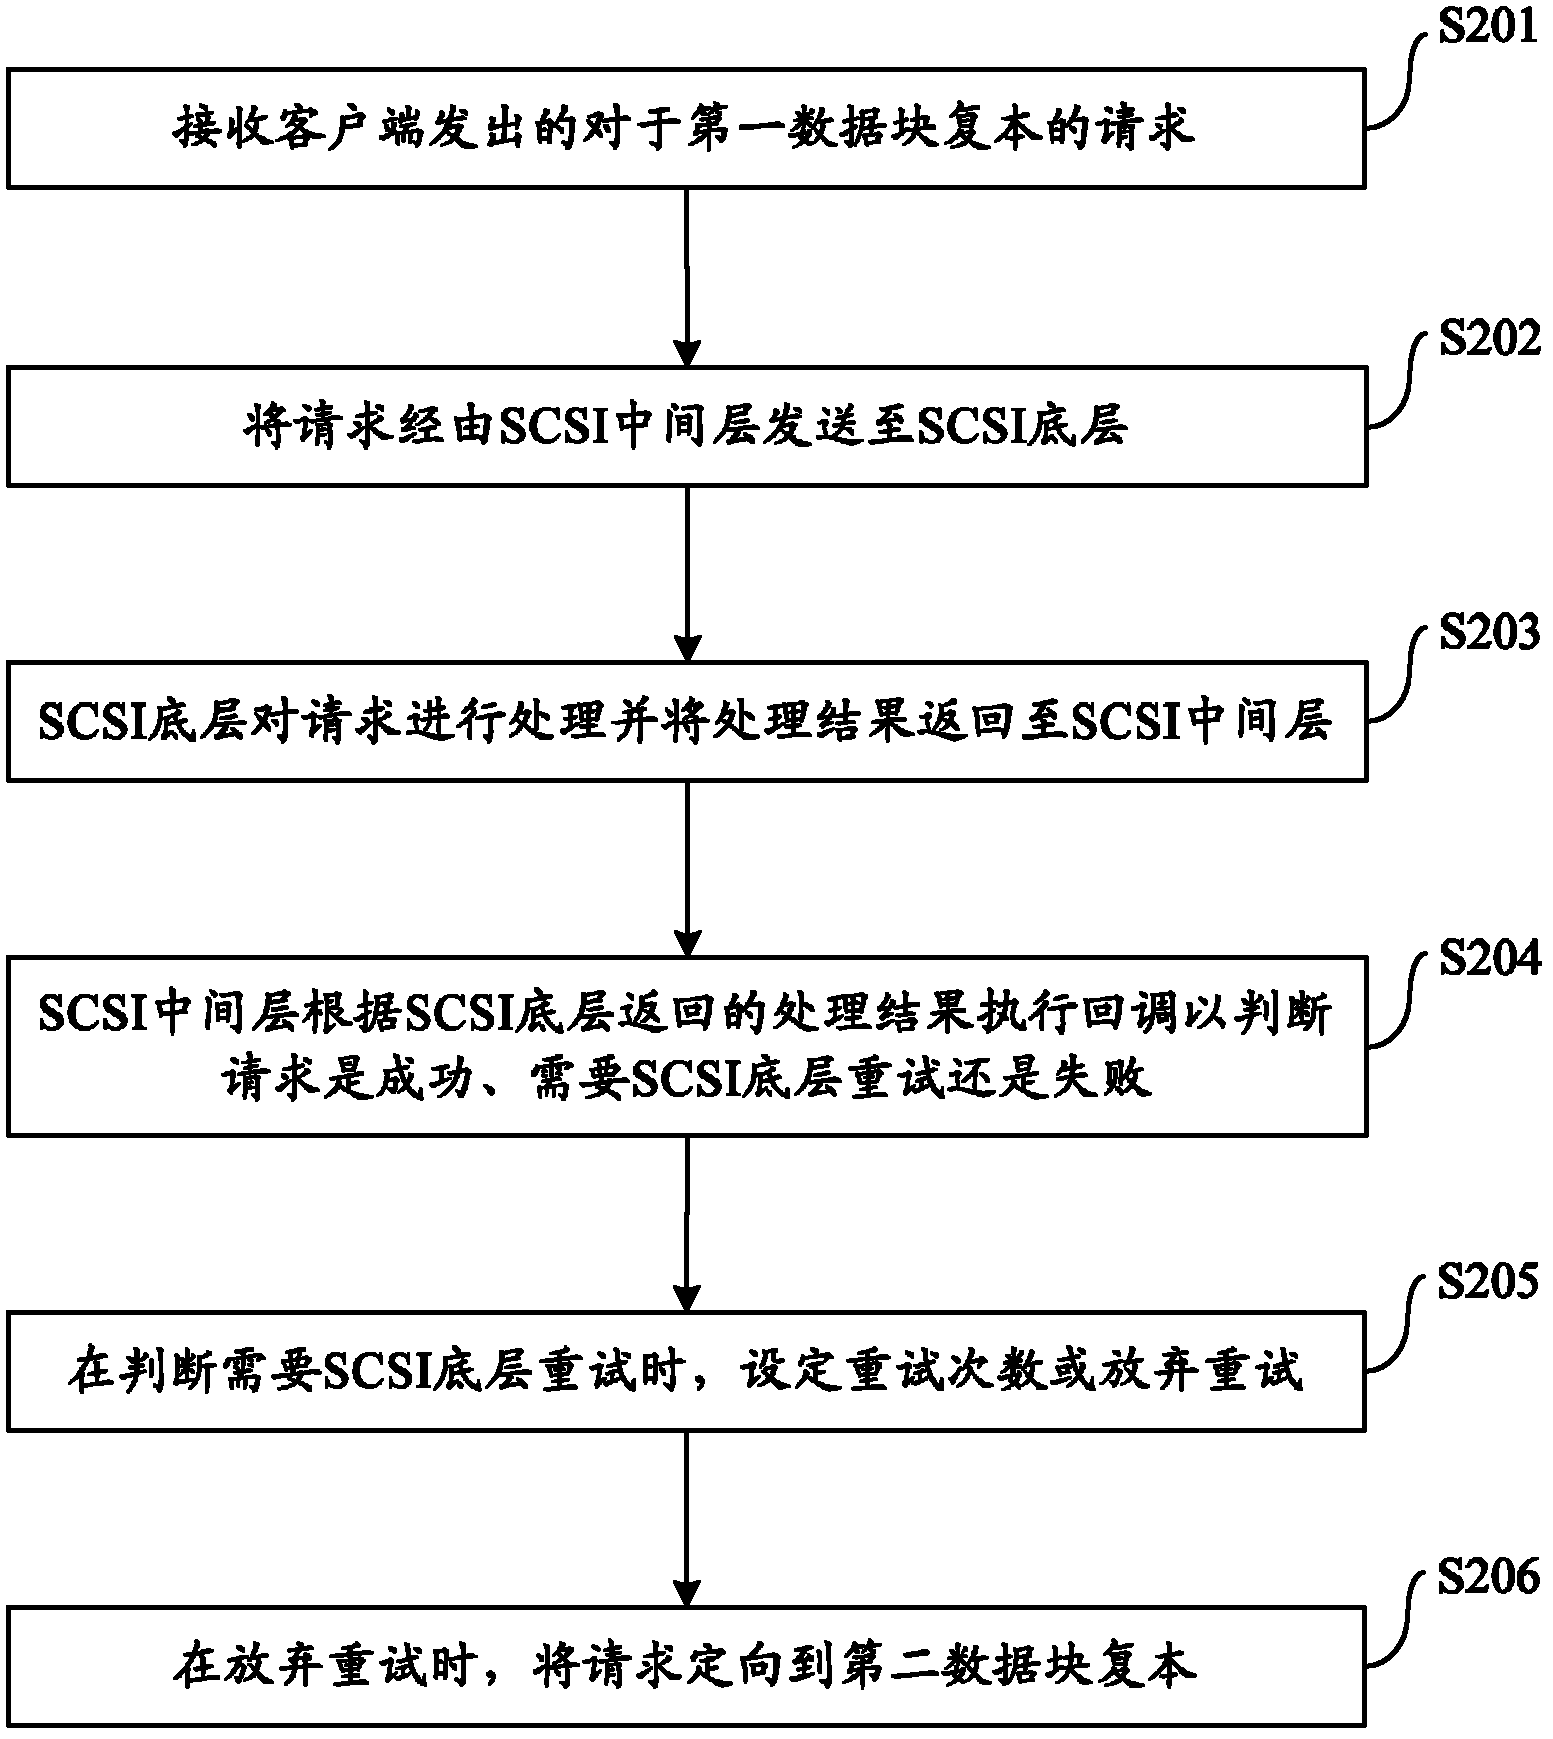 Small computer system interface (SCSI) fault-tolerant optimization method and device based on hadoop distributed file system (HDFS)